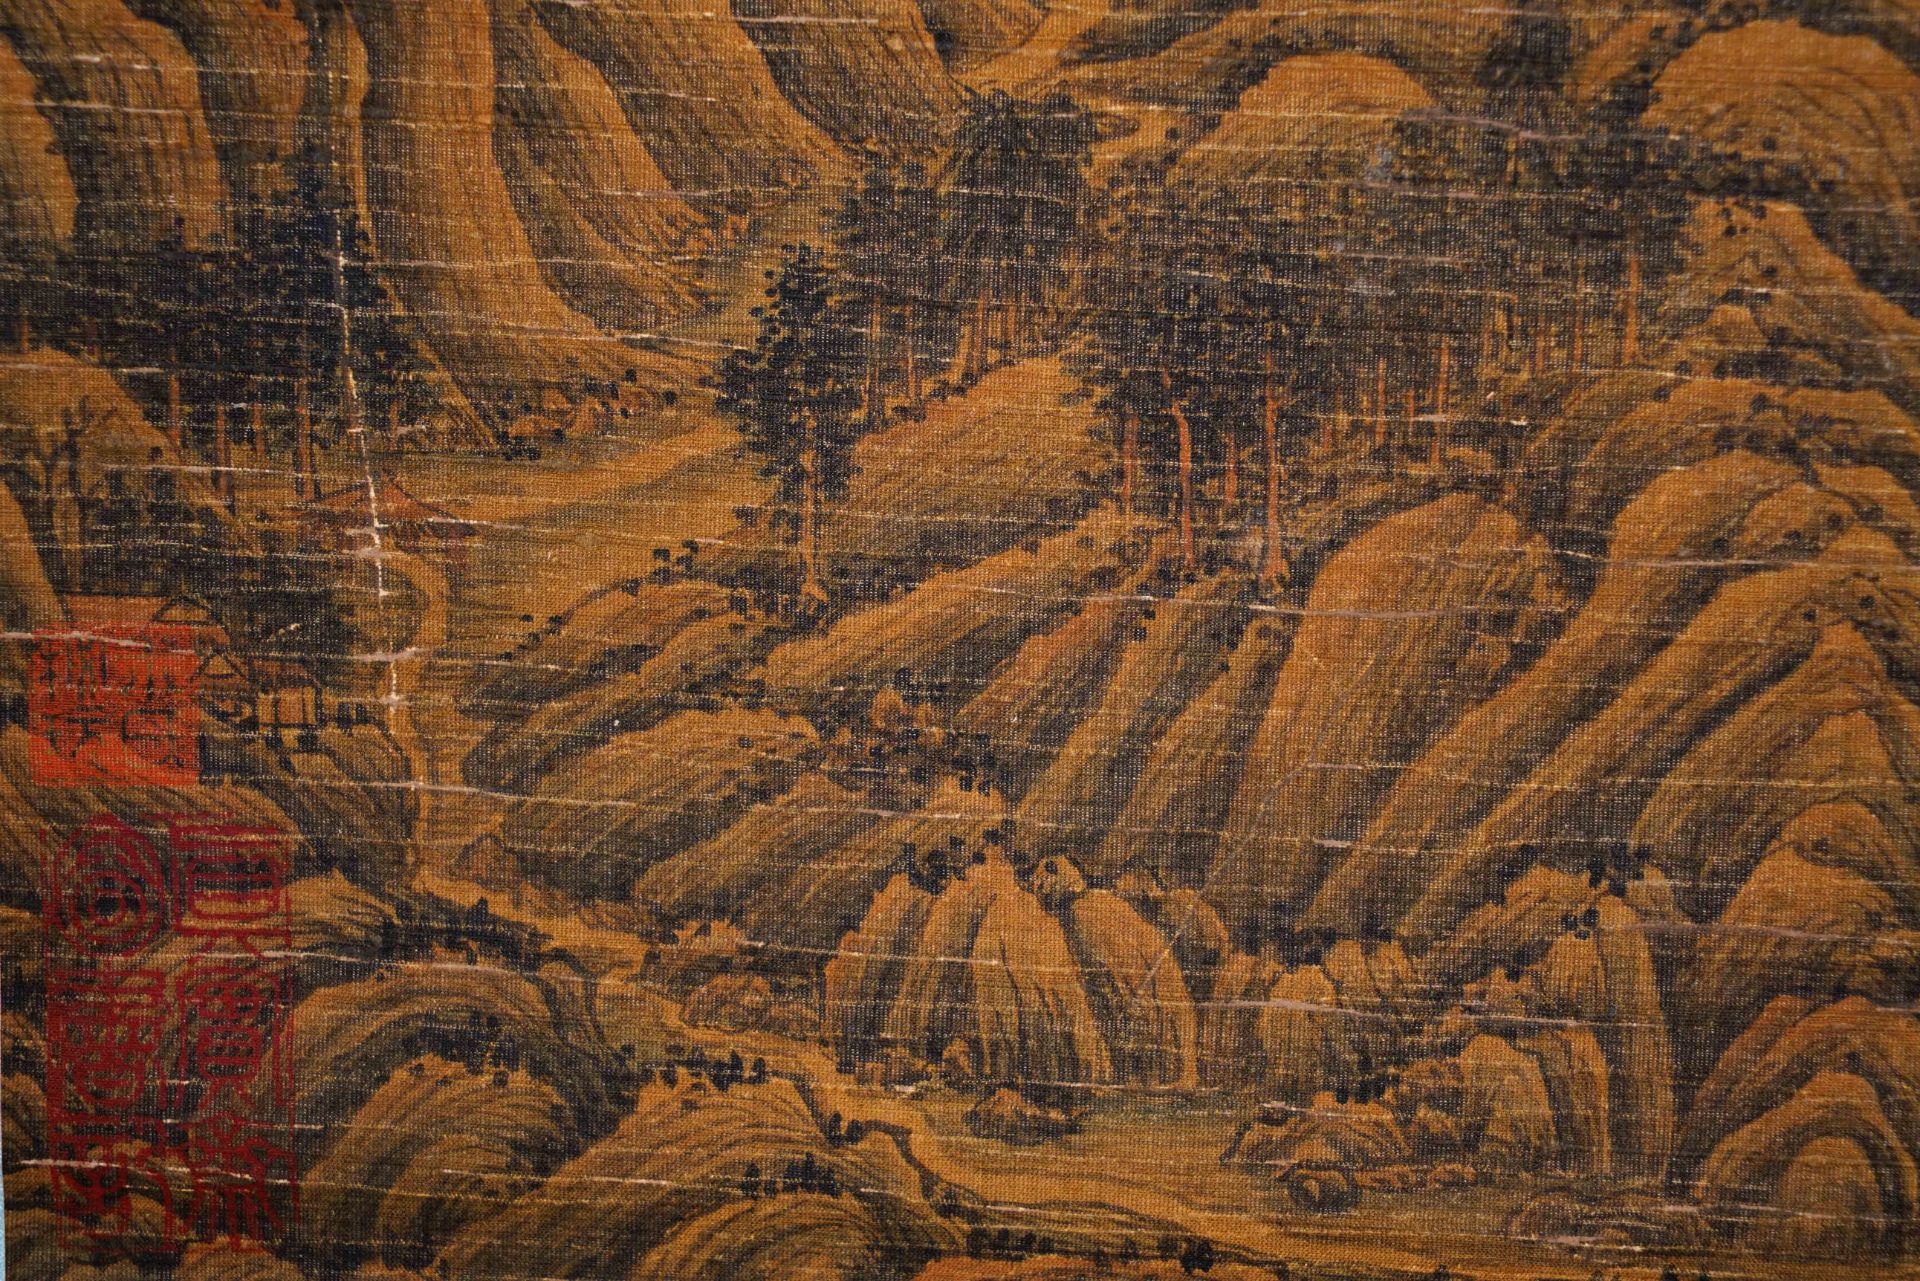 A Chinese Scroll Painting By Dong Yuan - Image 11 of 12